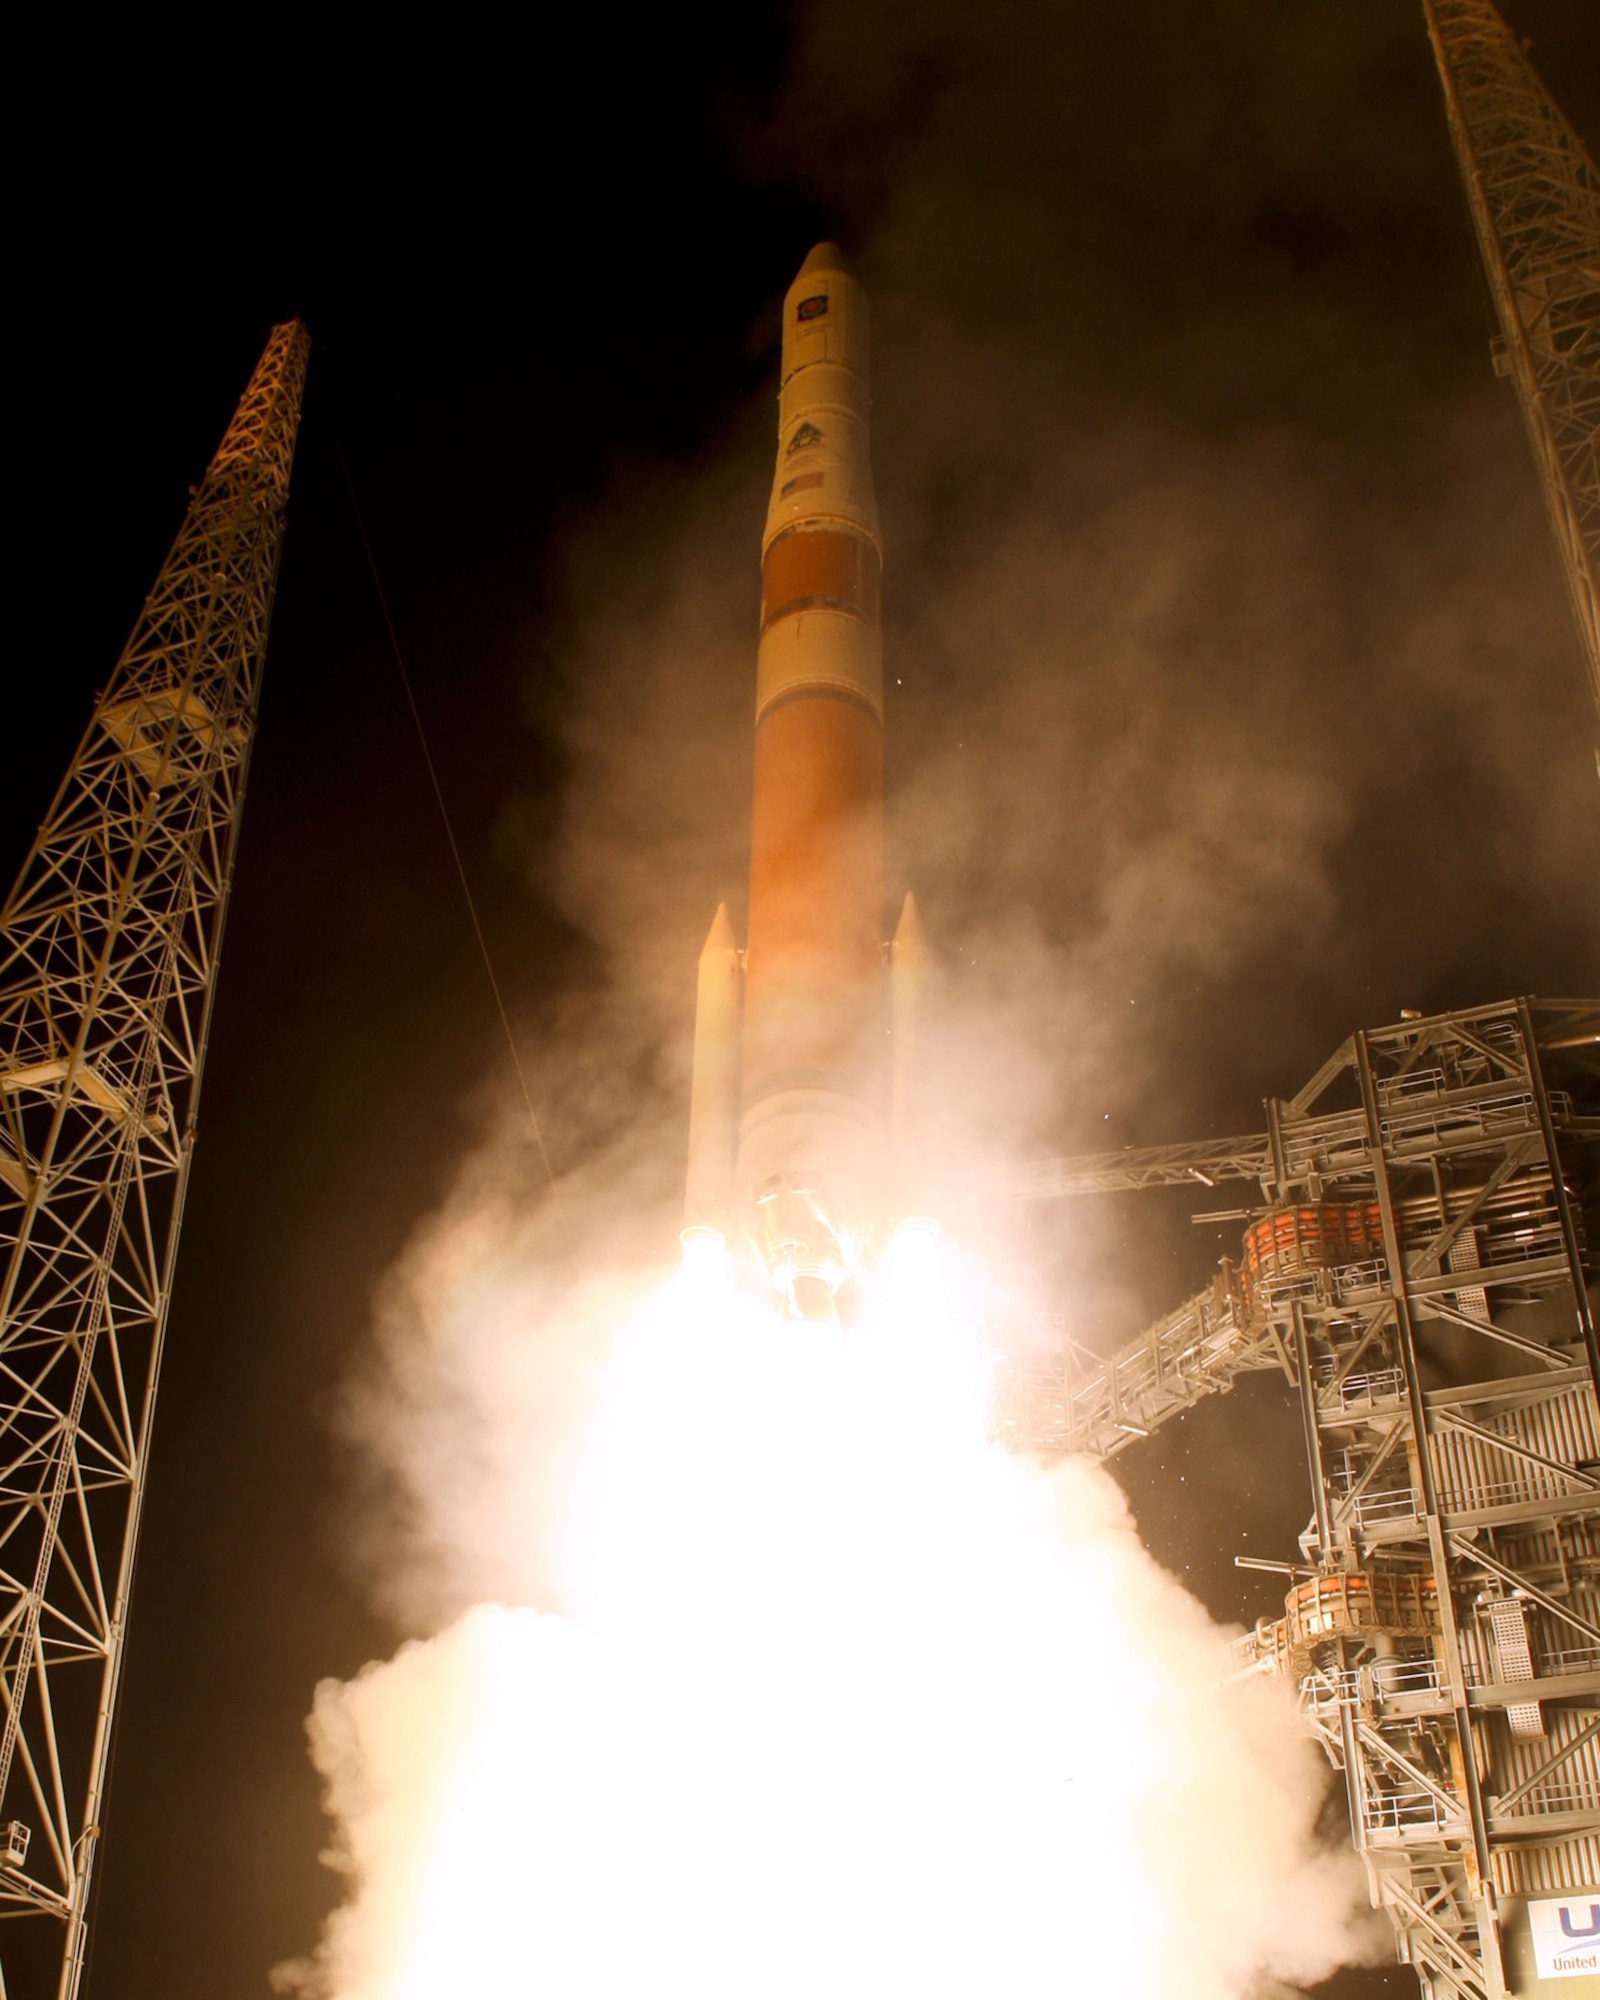 A Delta IV Rocket lifts off from Pad 37B at Cape Canaveral Air Force Station, Fla. carrying the newest addition to the GPS constellation. GPS IIF-1 will be the first of a new block of GPS satellites to be launched. (Photo by Pat Corkery, ULA)